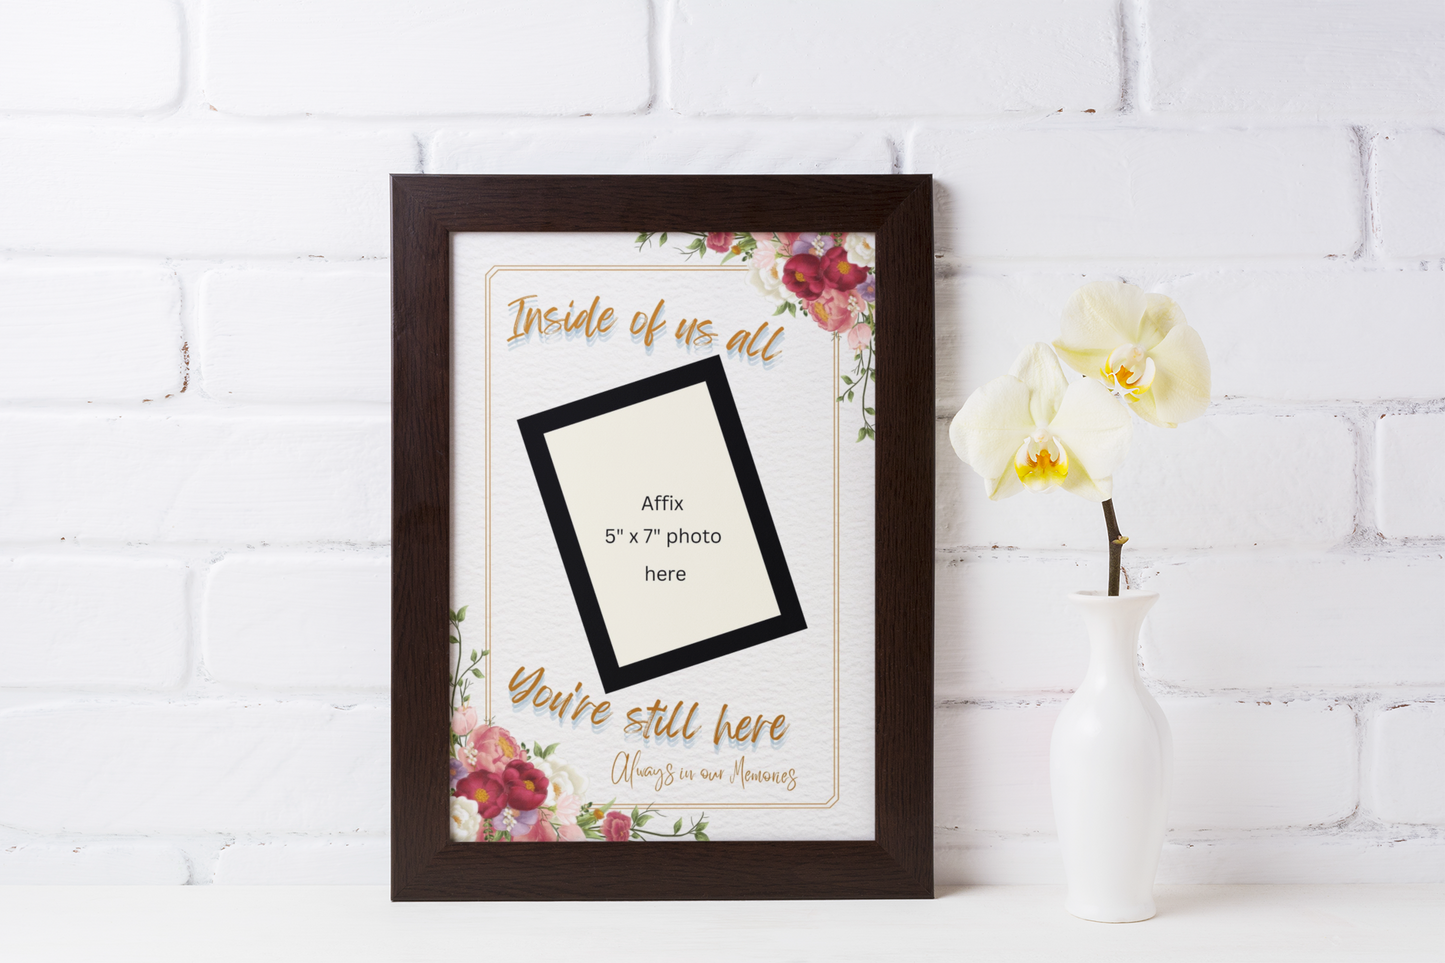 MEMORY of a LOVED ONE - QUIRKY UNIQUE WALL ART with a FLOWER theme, featuring heartfelt words of love to remember them always.